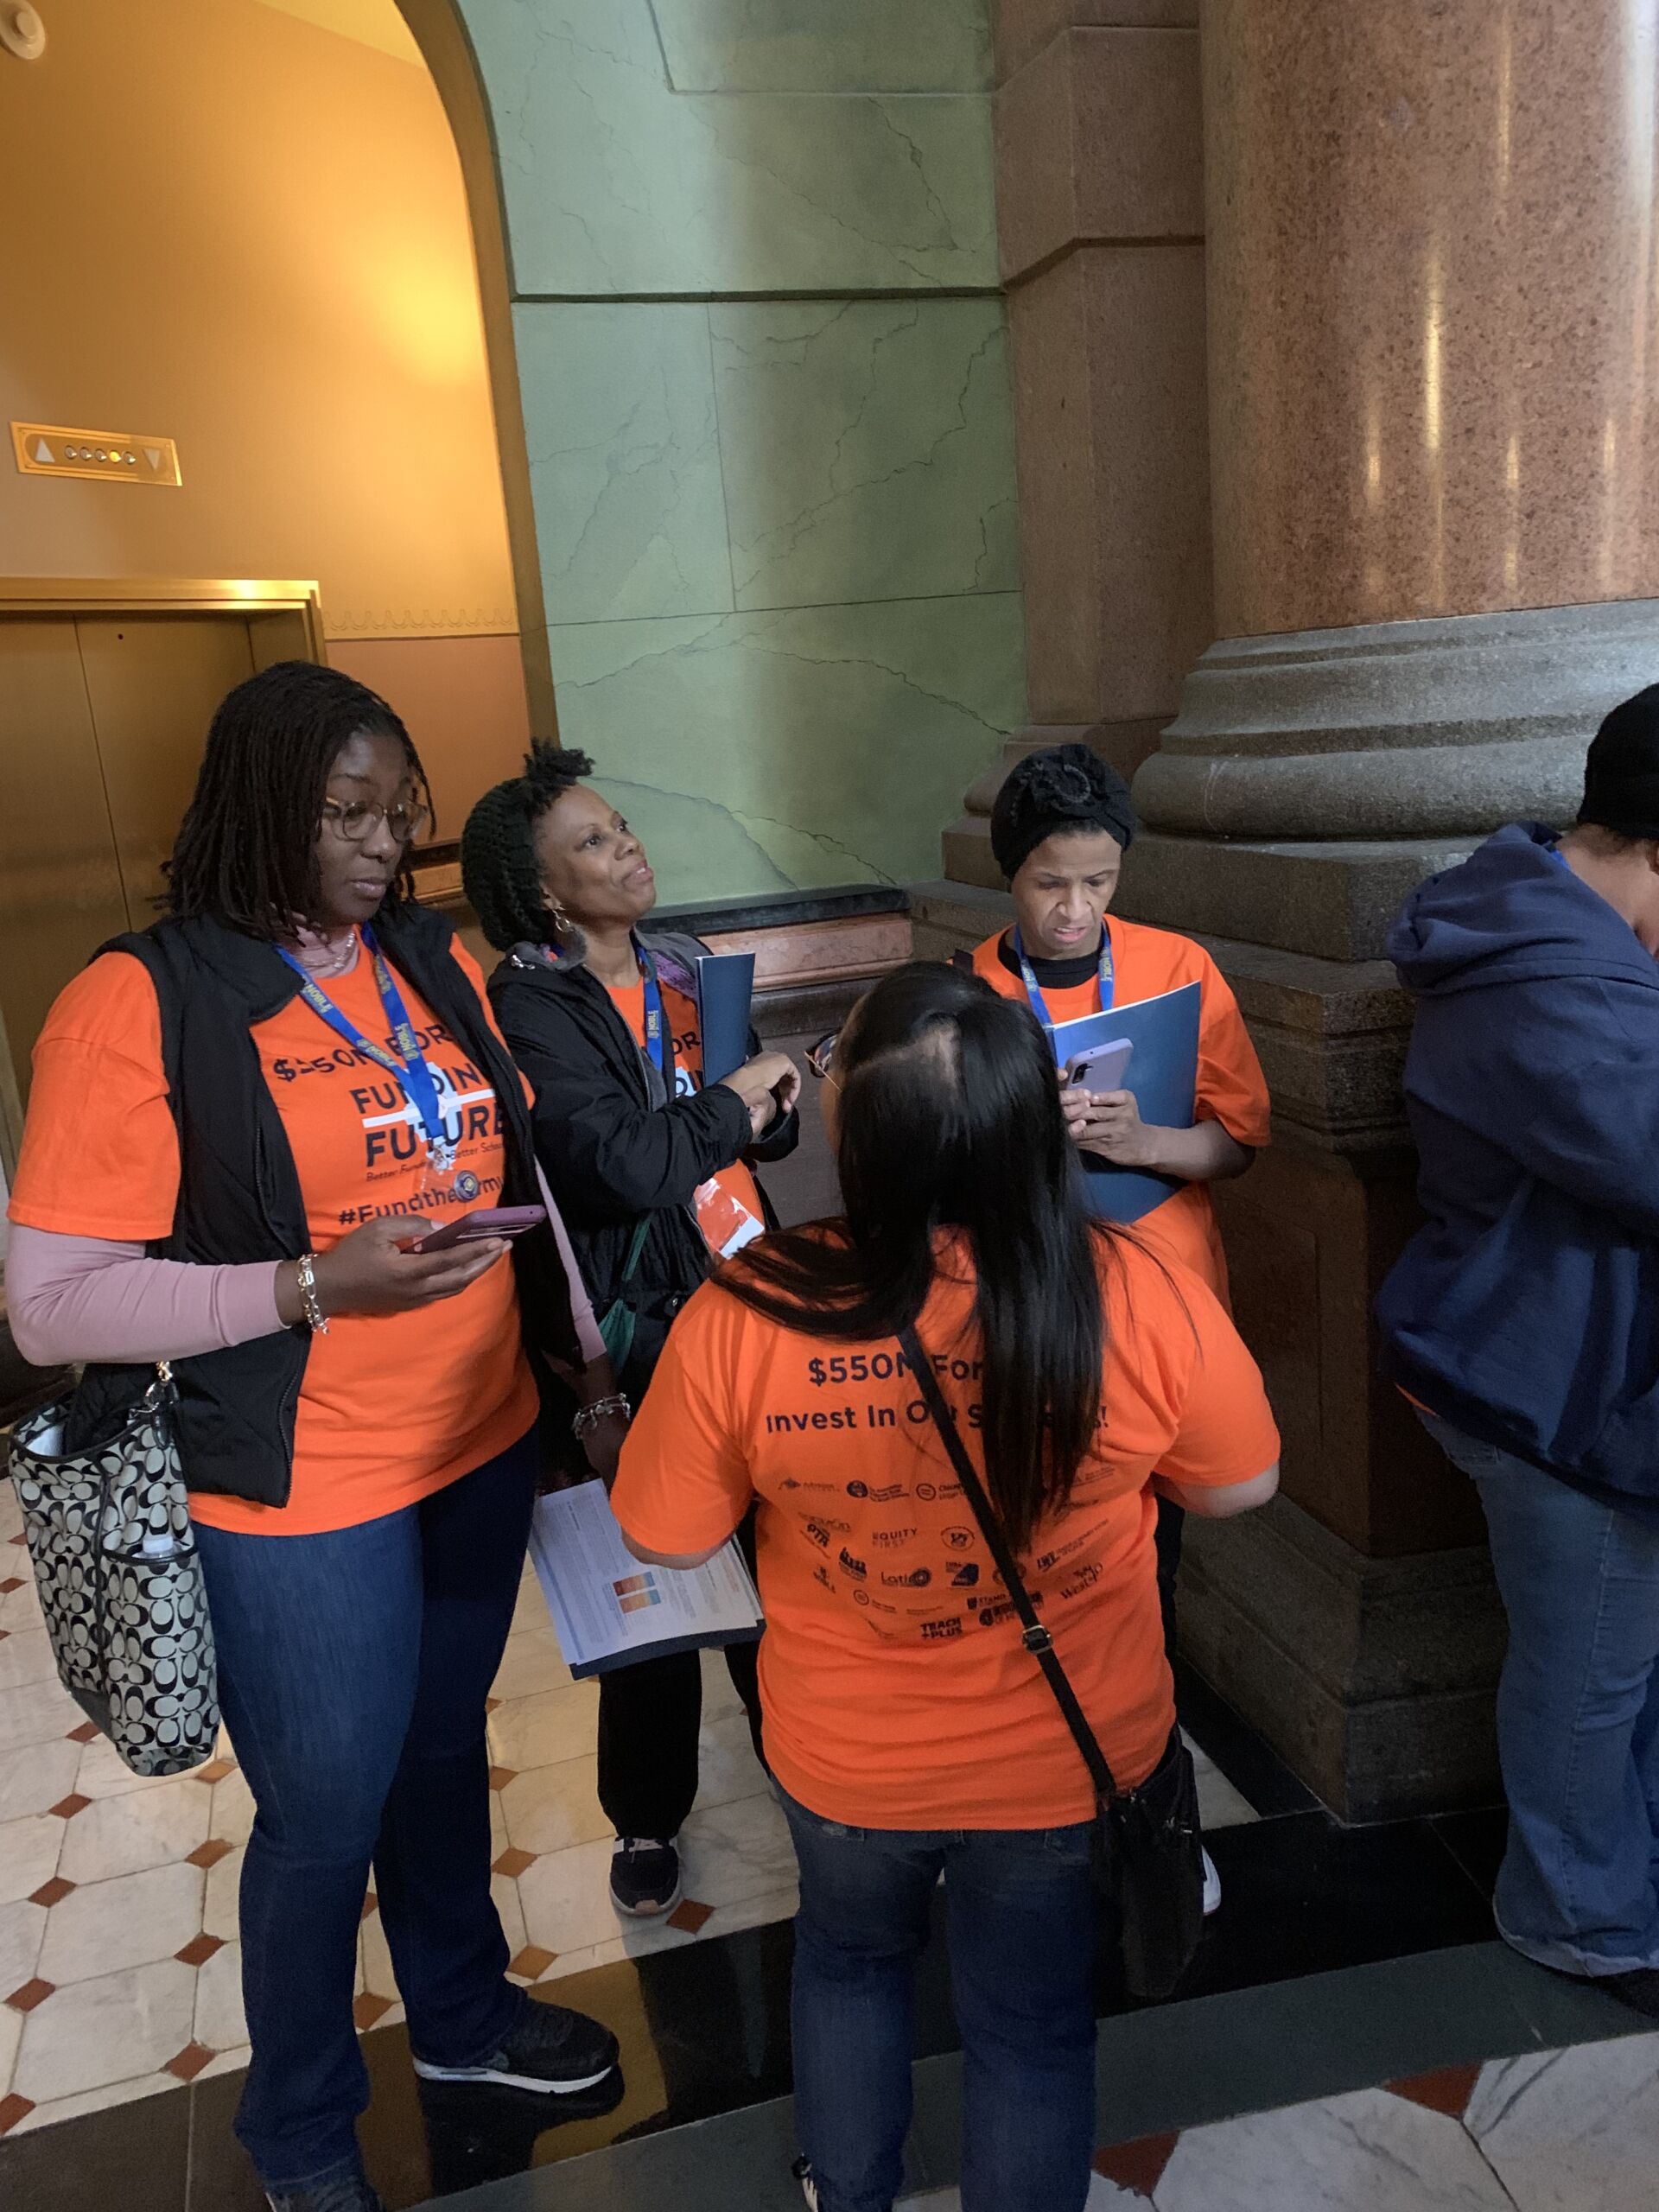 Image shows Noble Schools' parents and a staff member talking while they wait to speak with representatives in the hallways of the Illinois State Capitol building. They are all wearing bright orange shirts that read "$550M for Evidence-Based Funding" and have the Illinois Funding Future logo on them. They are holding folders with all the information they need to prep for their talks with representatives.